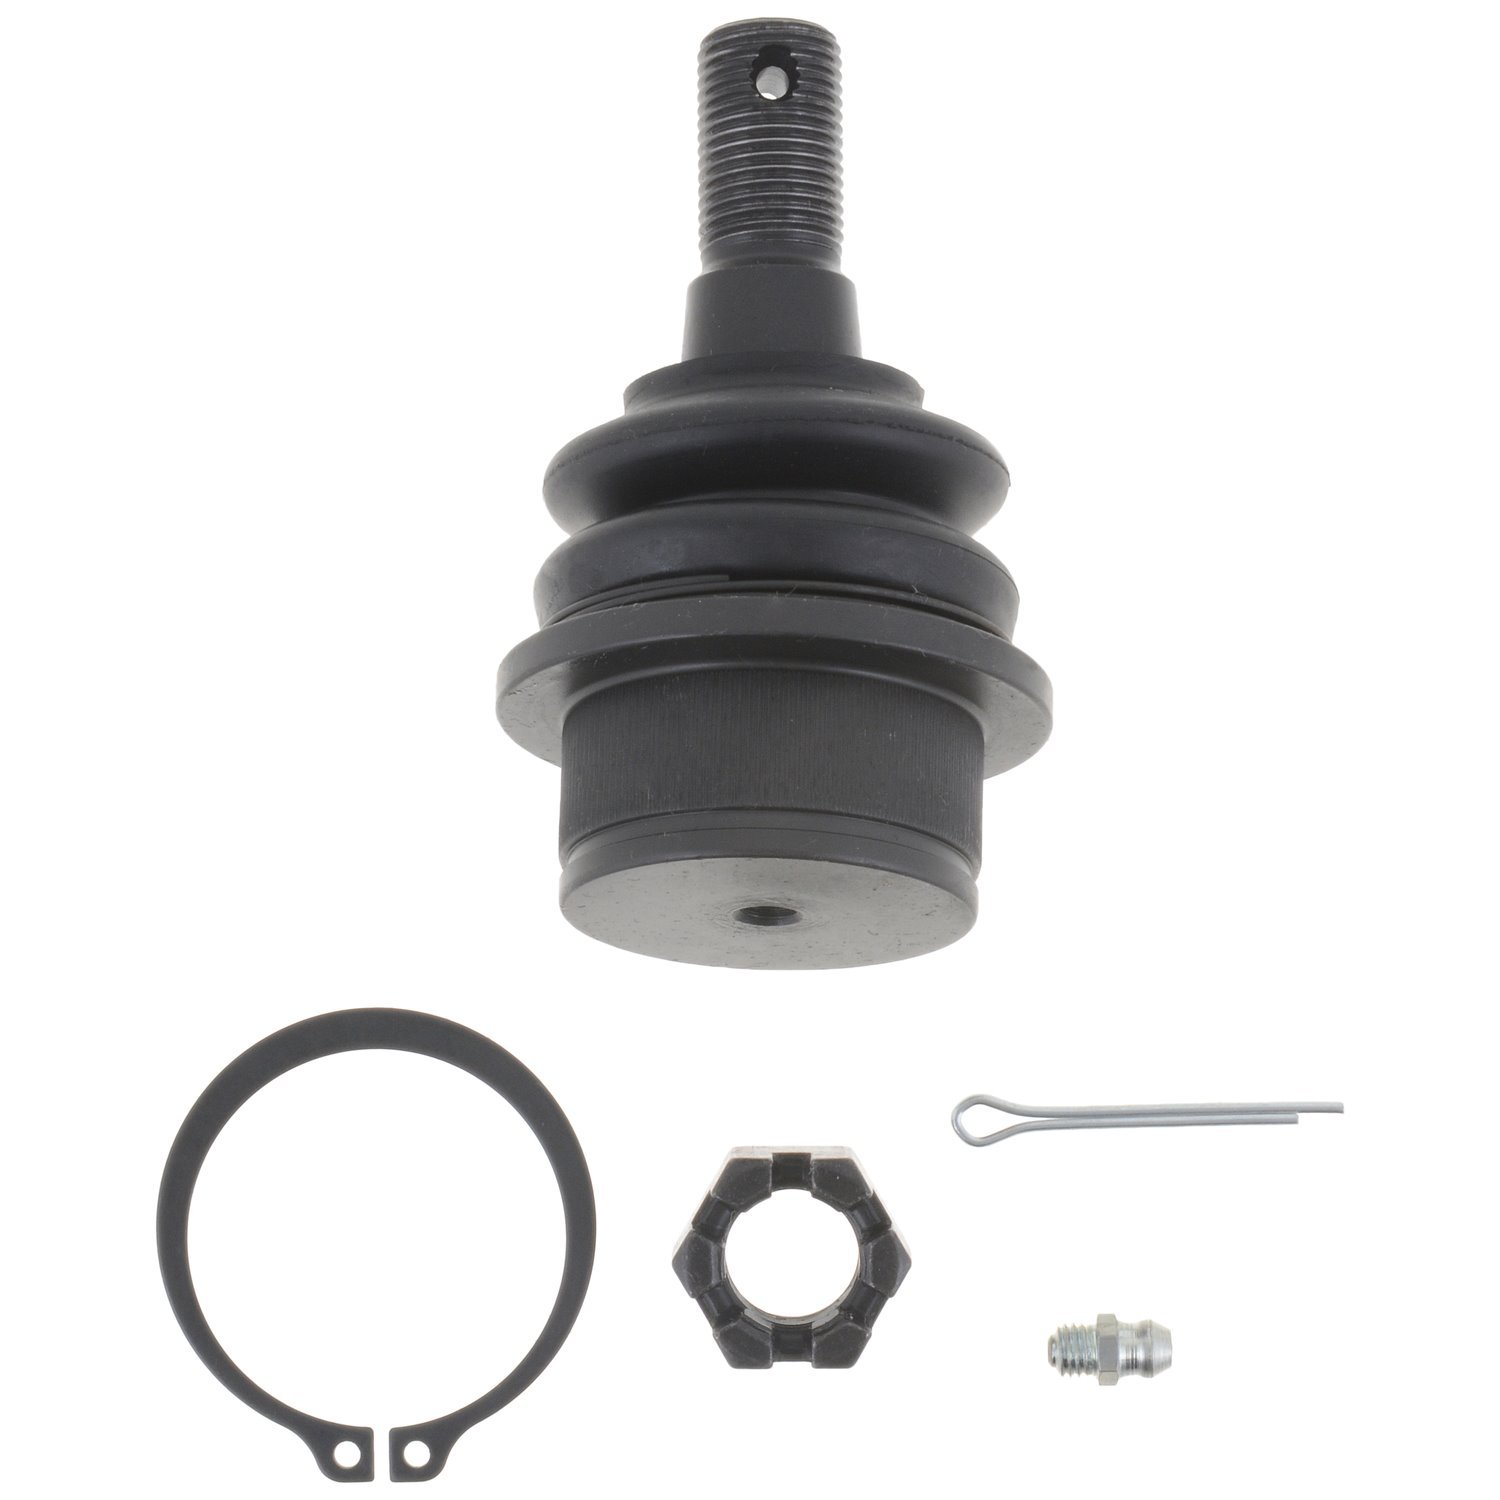 JBJ1171 Ball Joint Fits Select Ford Models, Position: Left/Driver or Right/Passenger, Front Lower